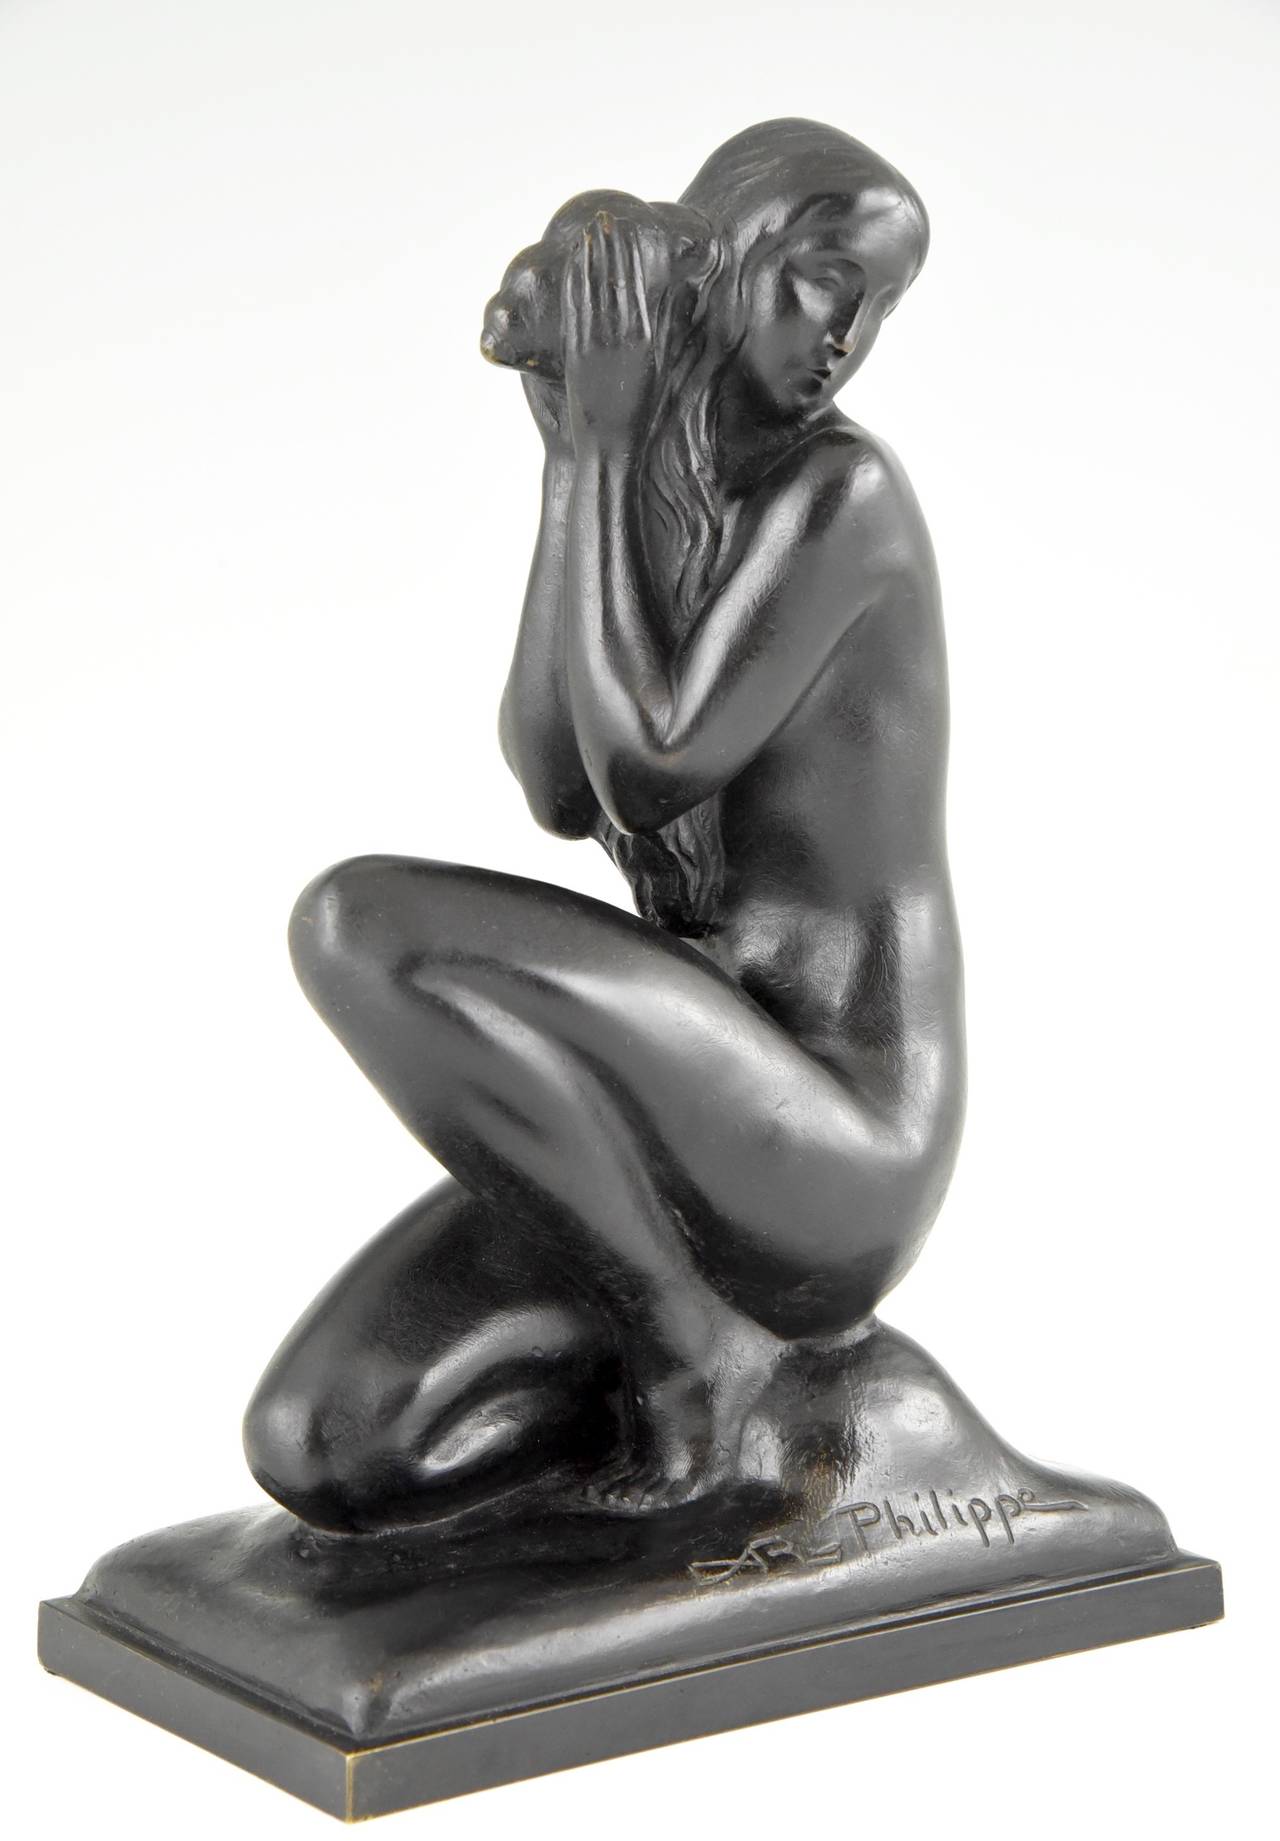 Mid-20th Century Art Deco Bronze Sculpture of a Nude with Shell by A. R. Philippe